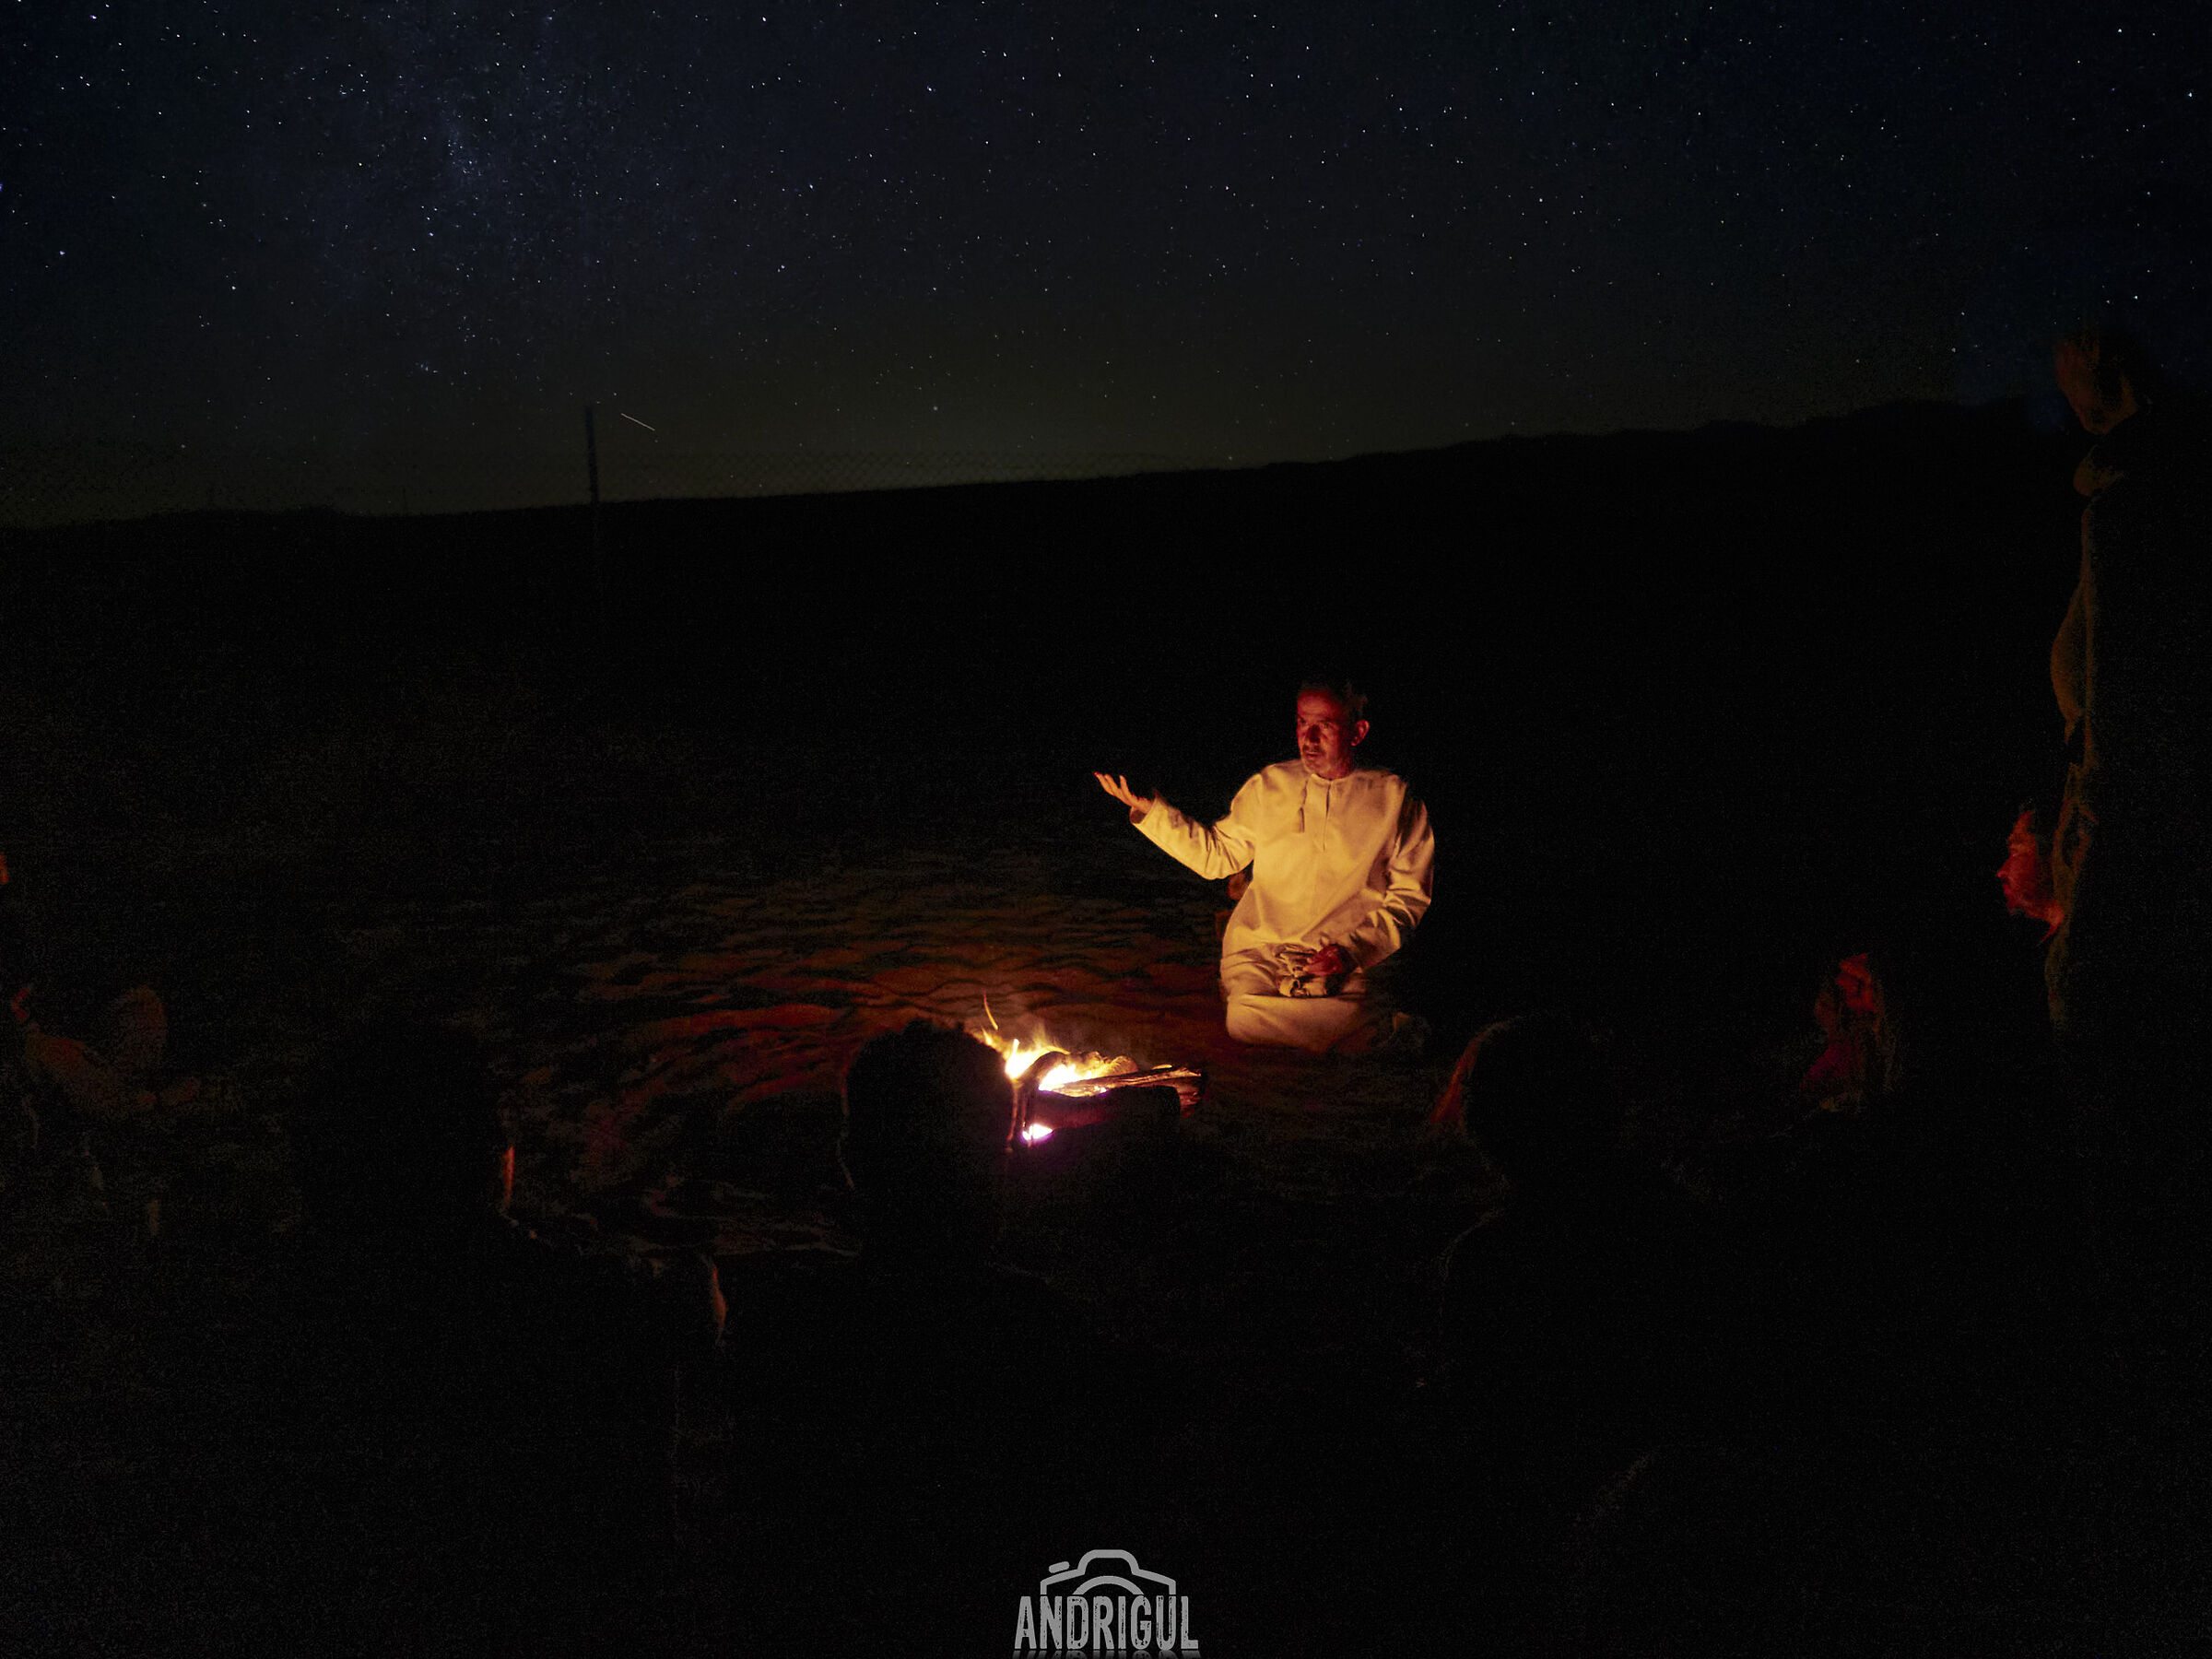 Bedouin tales around the fire...